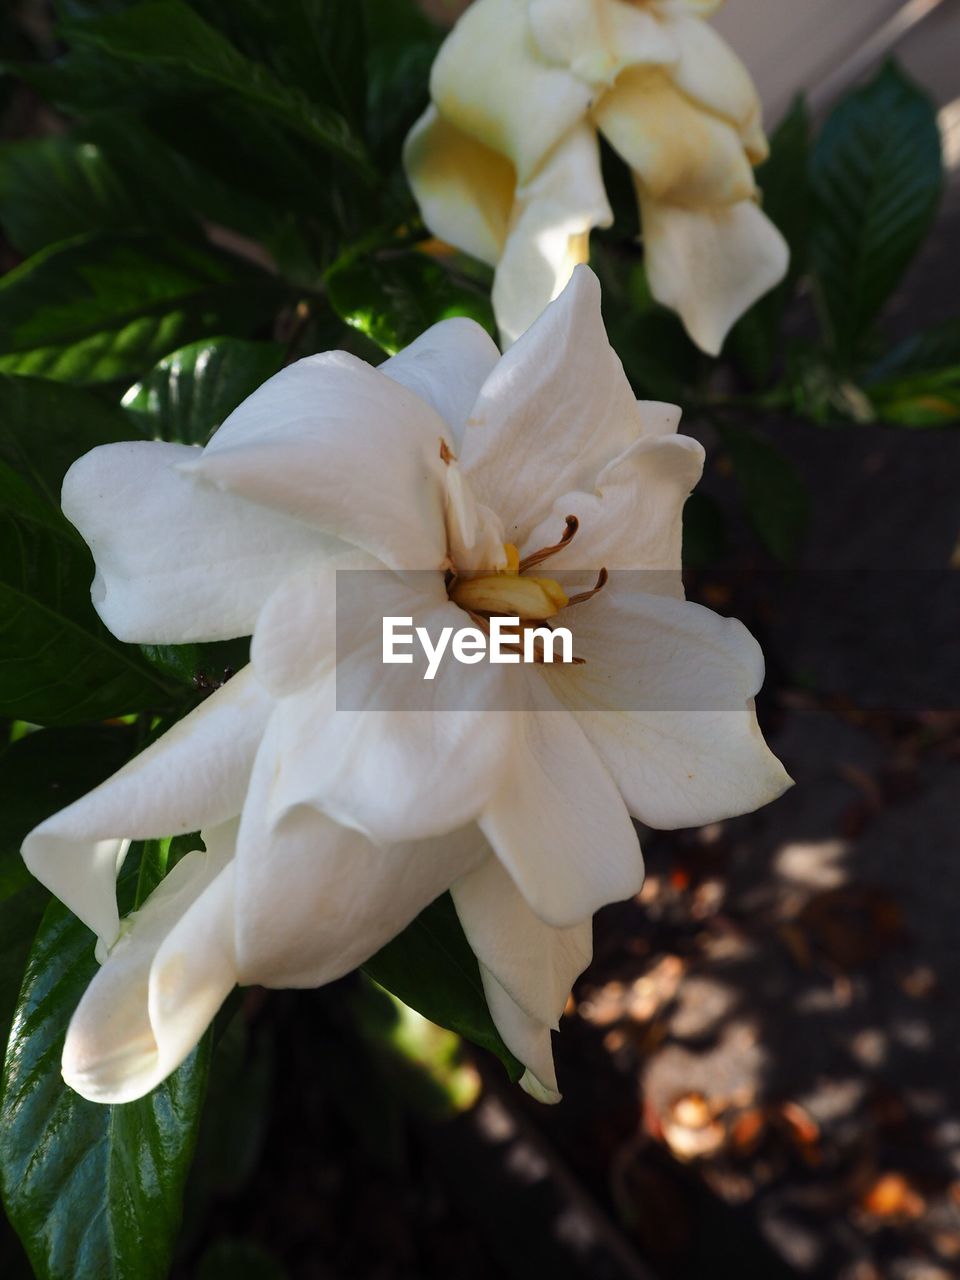 CLOSE-UP OF WHITE DAY LILY FLOWERS BLOOMING OUTDOORS